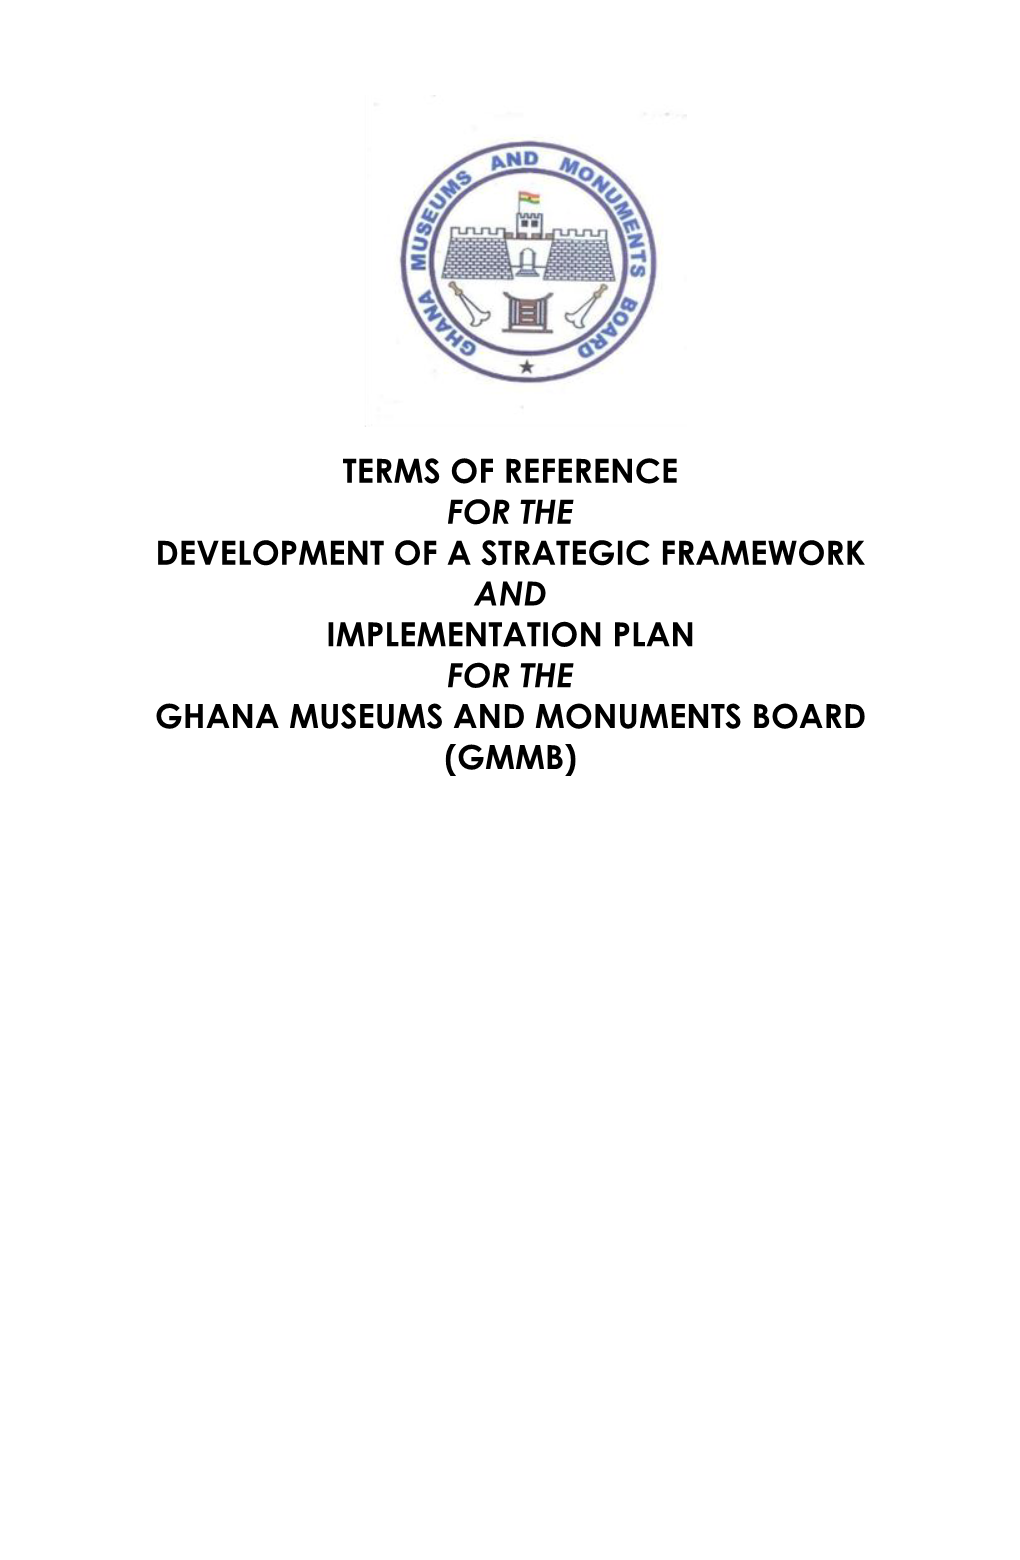 Terms of Reference for the Development of a Strategic Framework and Implementation Plan for the Ghana Museums and Monuments Board (Gmmb)